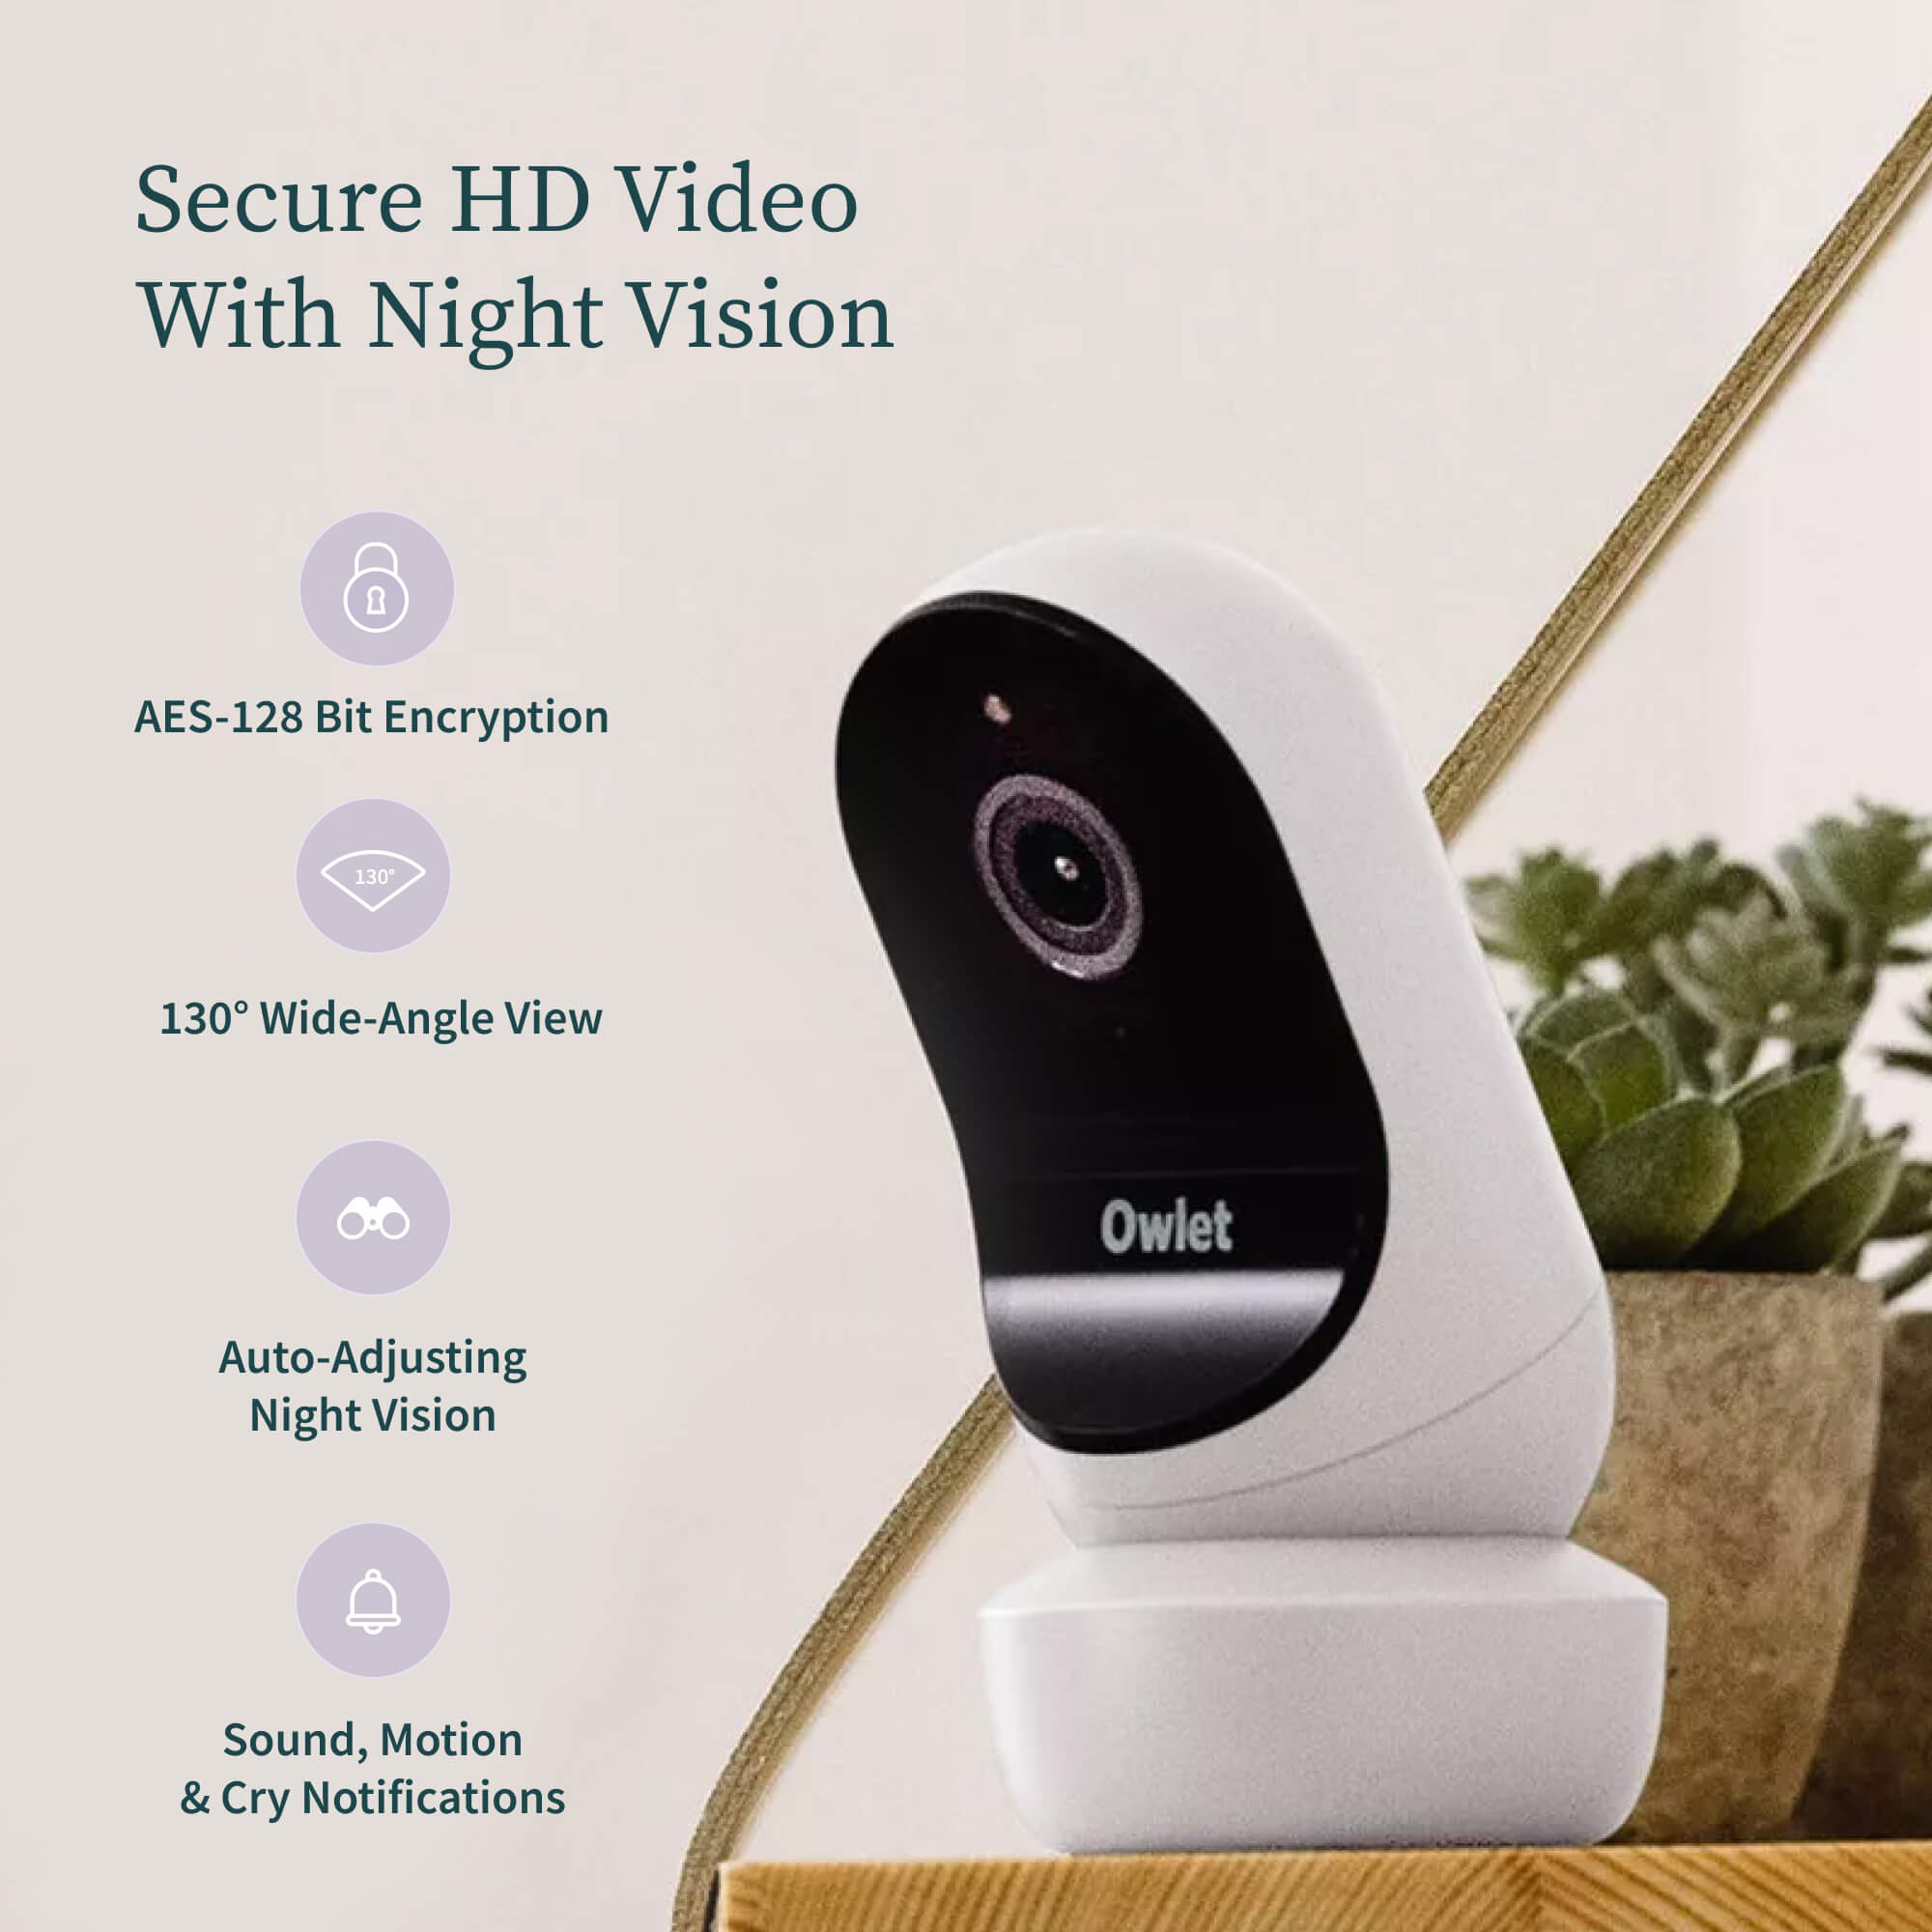 Secure HD video with night vision